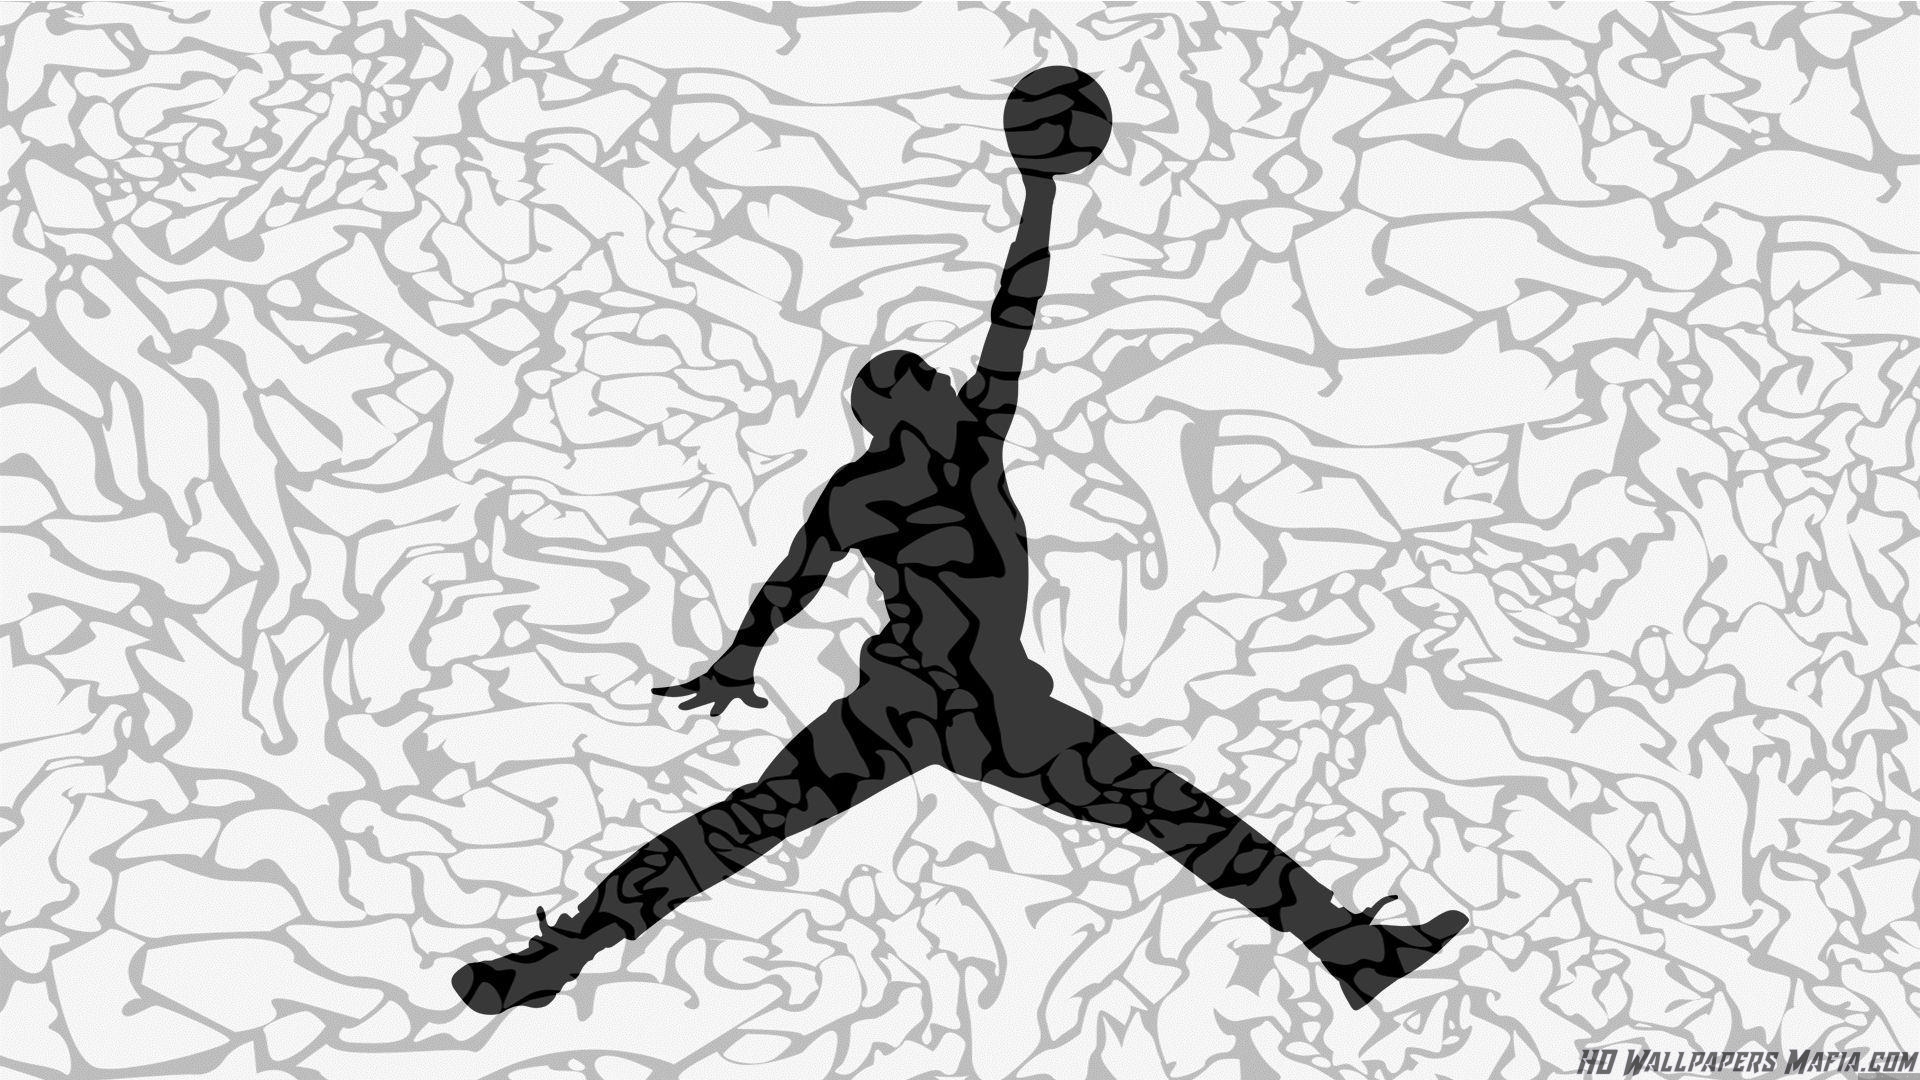 Air Jordan Wallpaper Hd - Jordan Wallpaper Hd , HD Wallpaper & Backgrounds